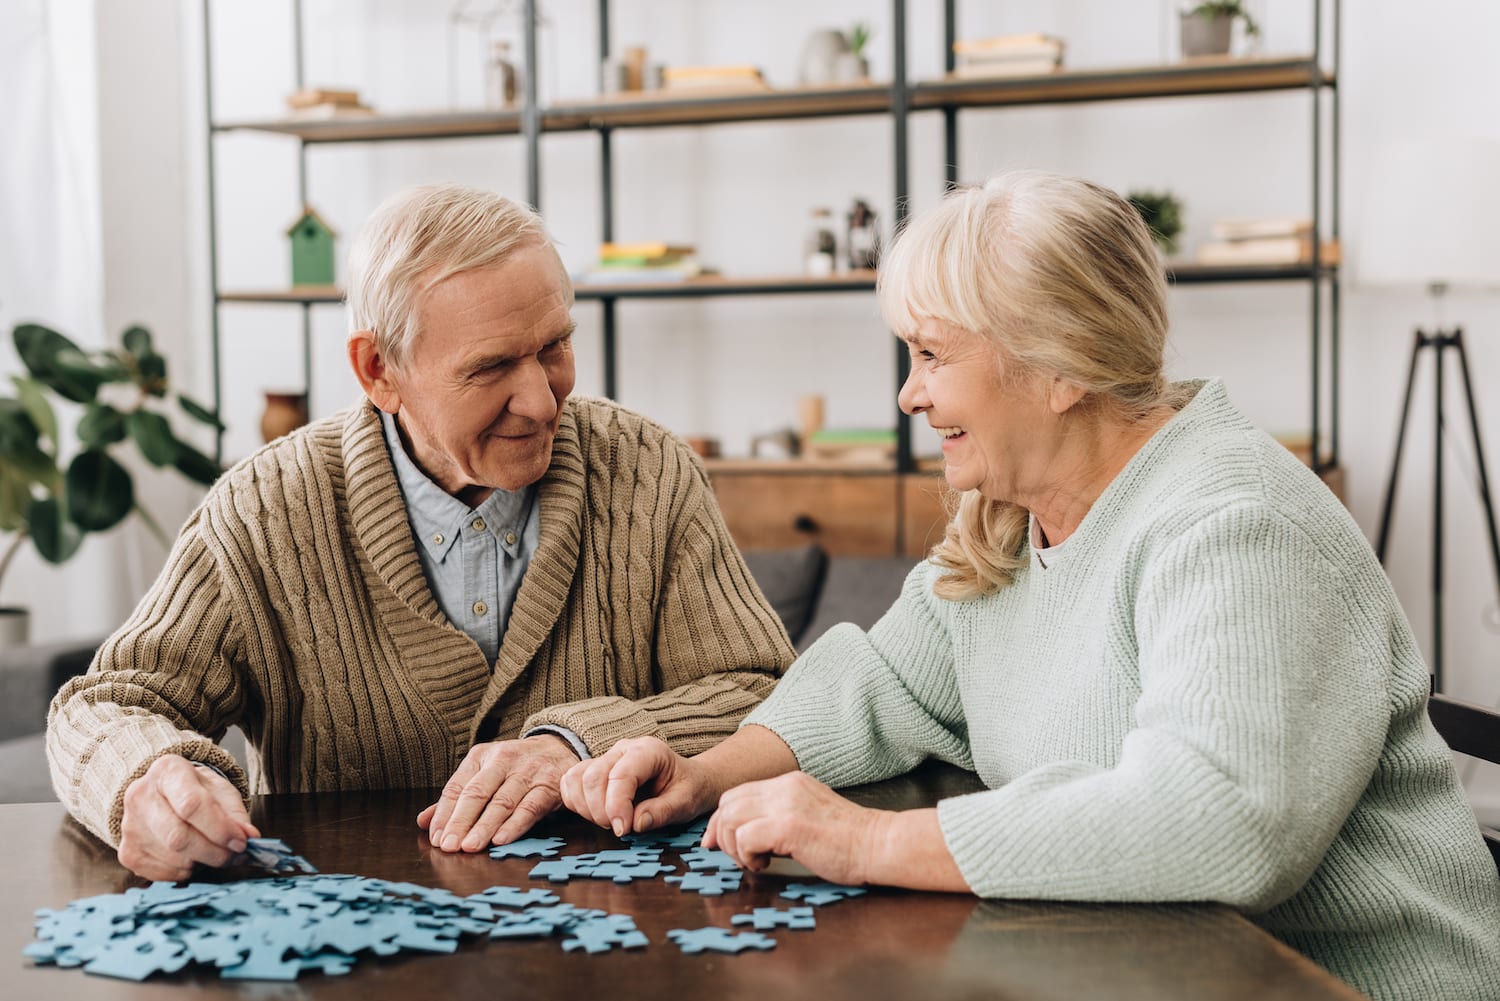 Elderly couple at table working on a puzzle